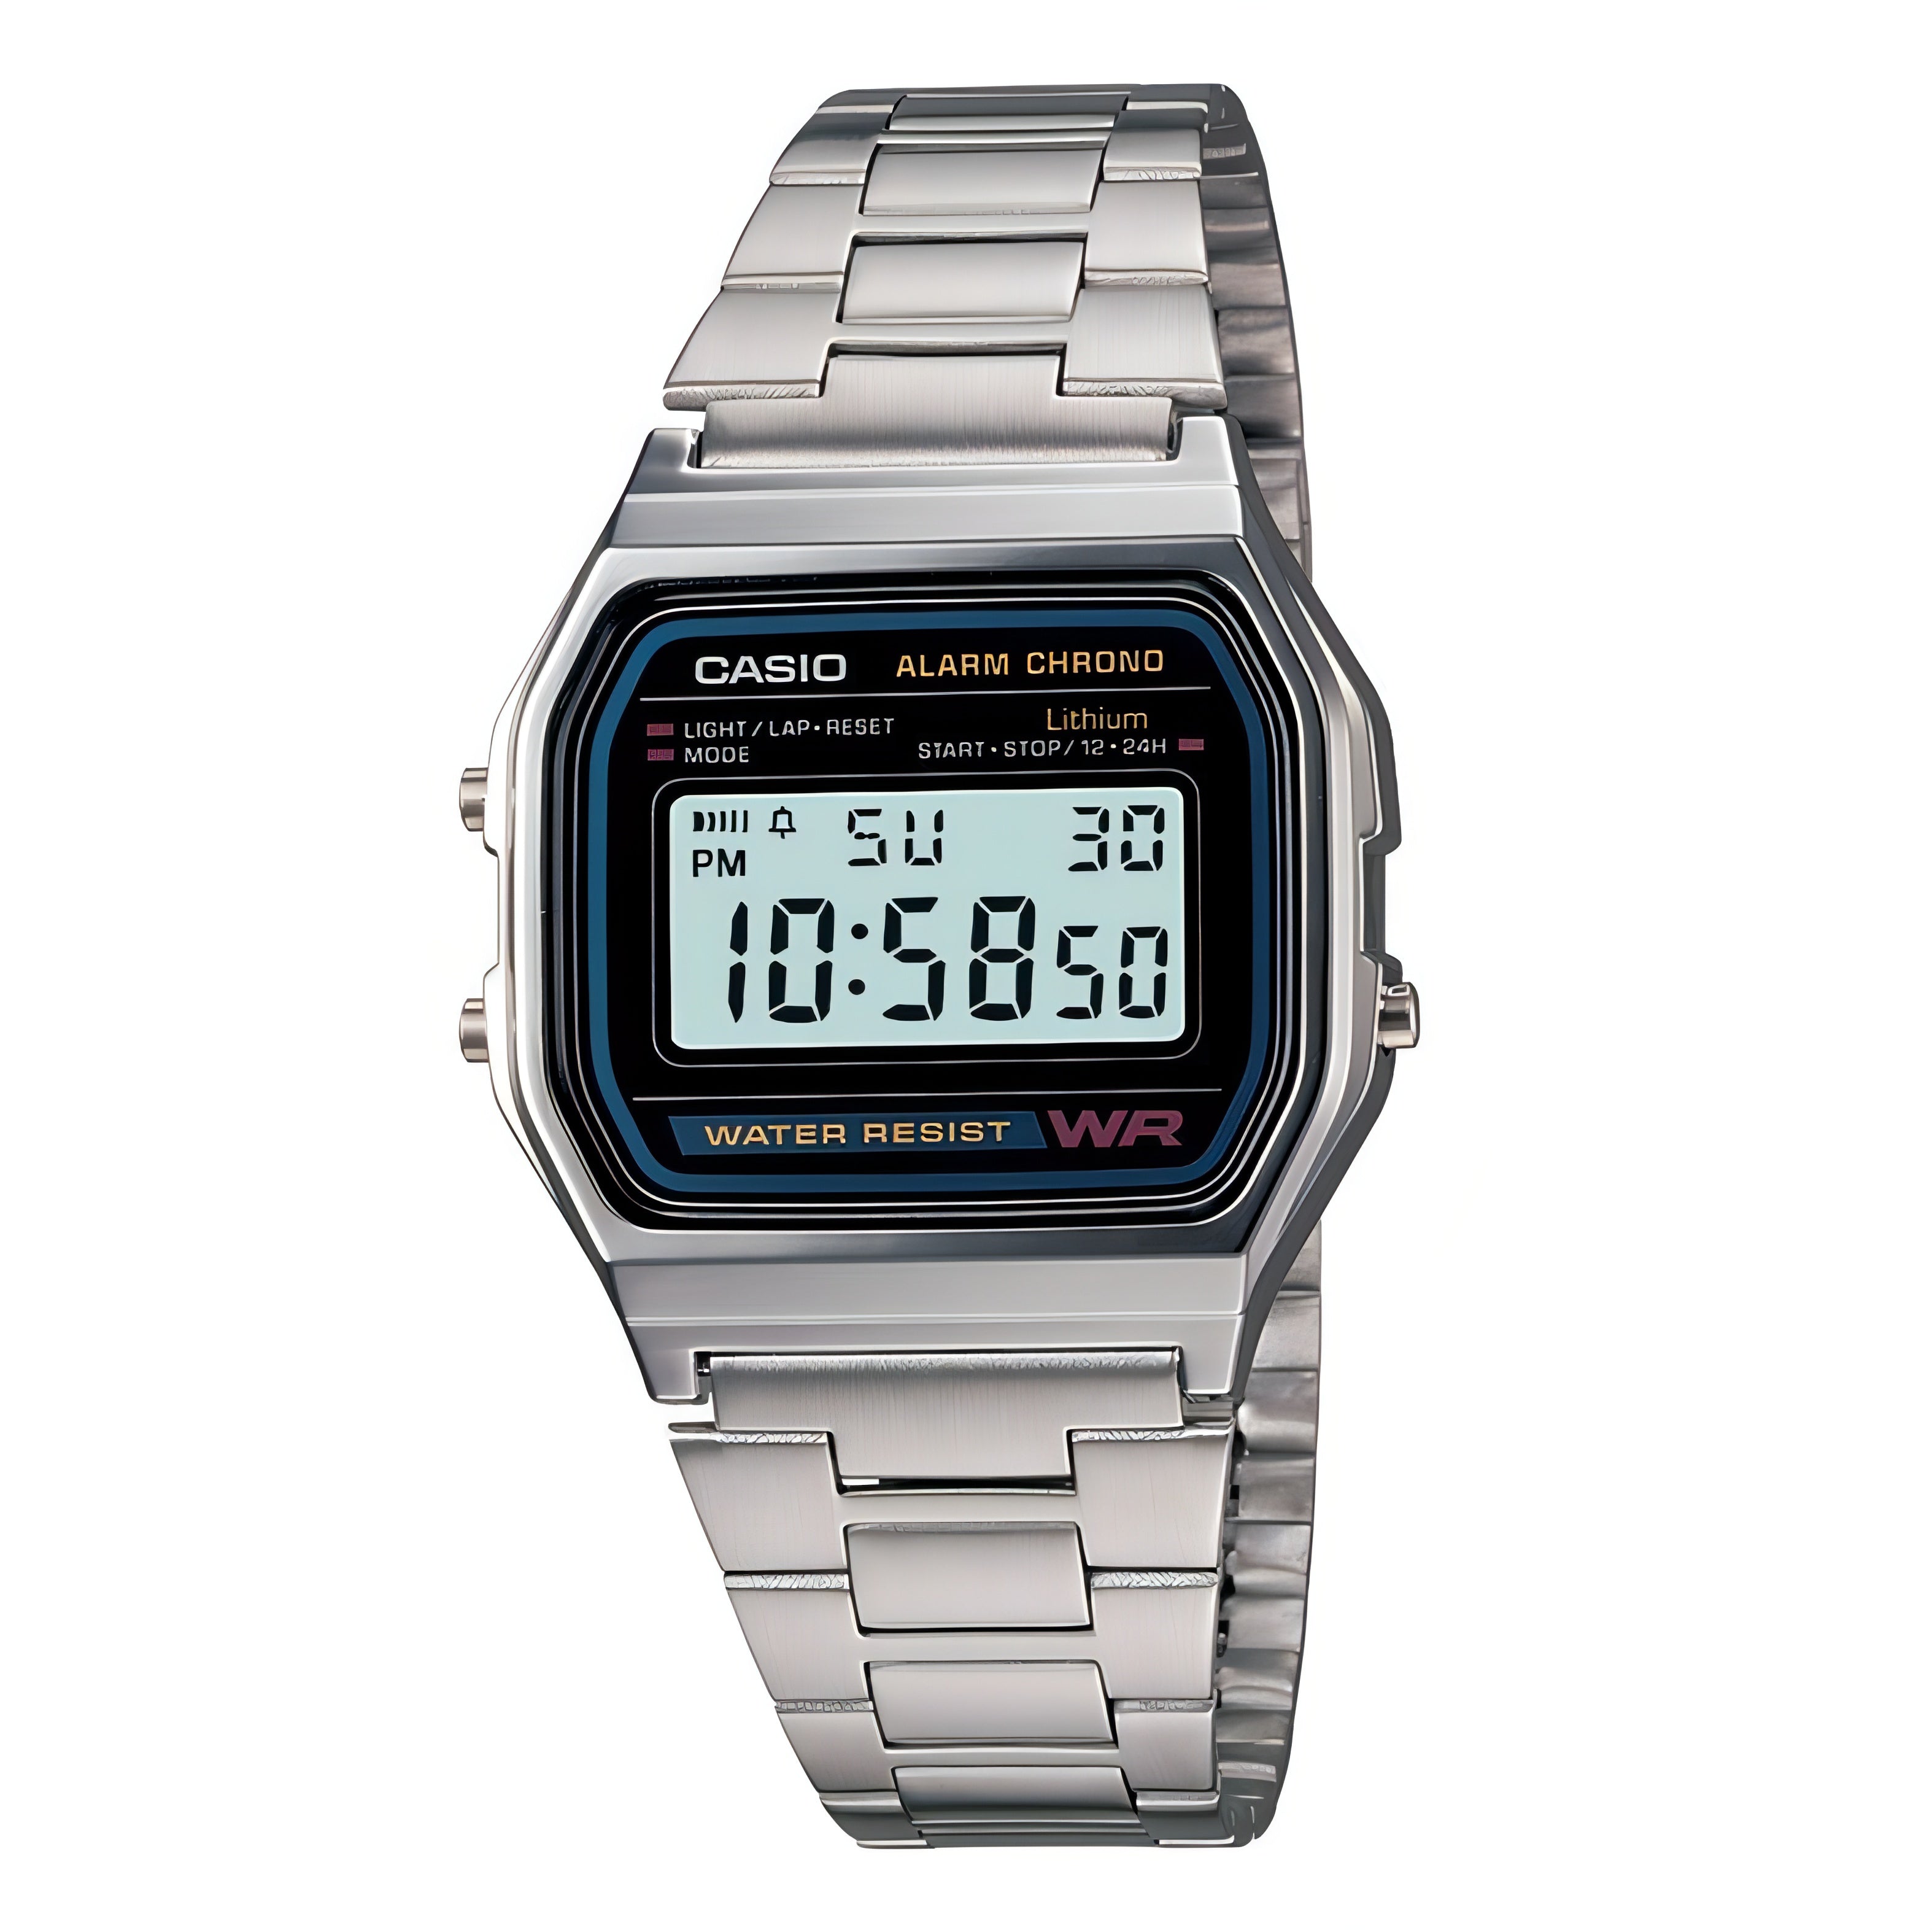 Casio A158WA Digital Watch - Vintage Style with Practical Features | Casio, A158WA, digital watch, stainless steel, vintage, classic, water-resistant, time, date, stopwatch, alarm, 24-hour time format, fashion, accessories, lifestyle.